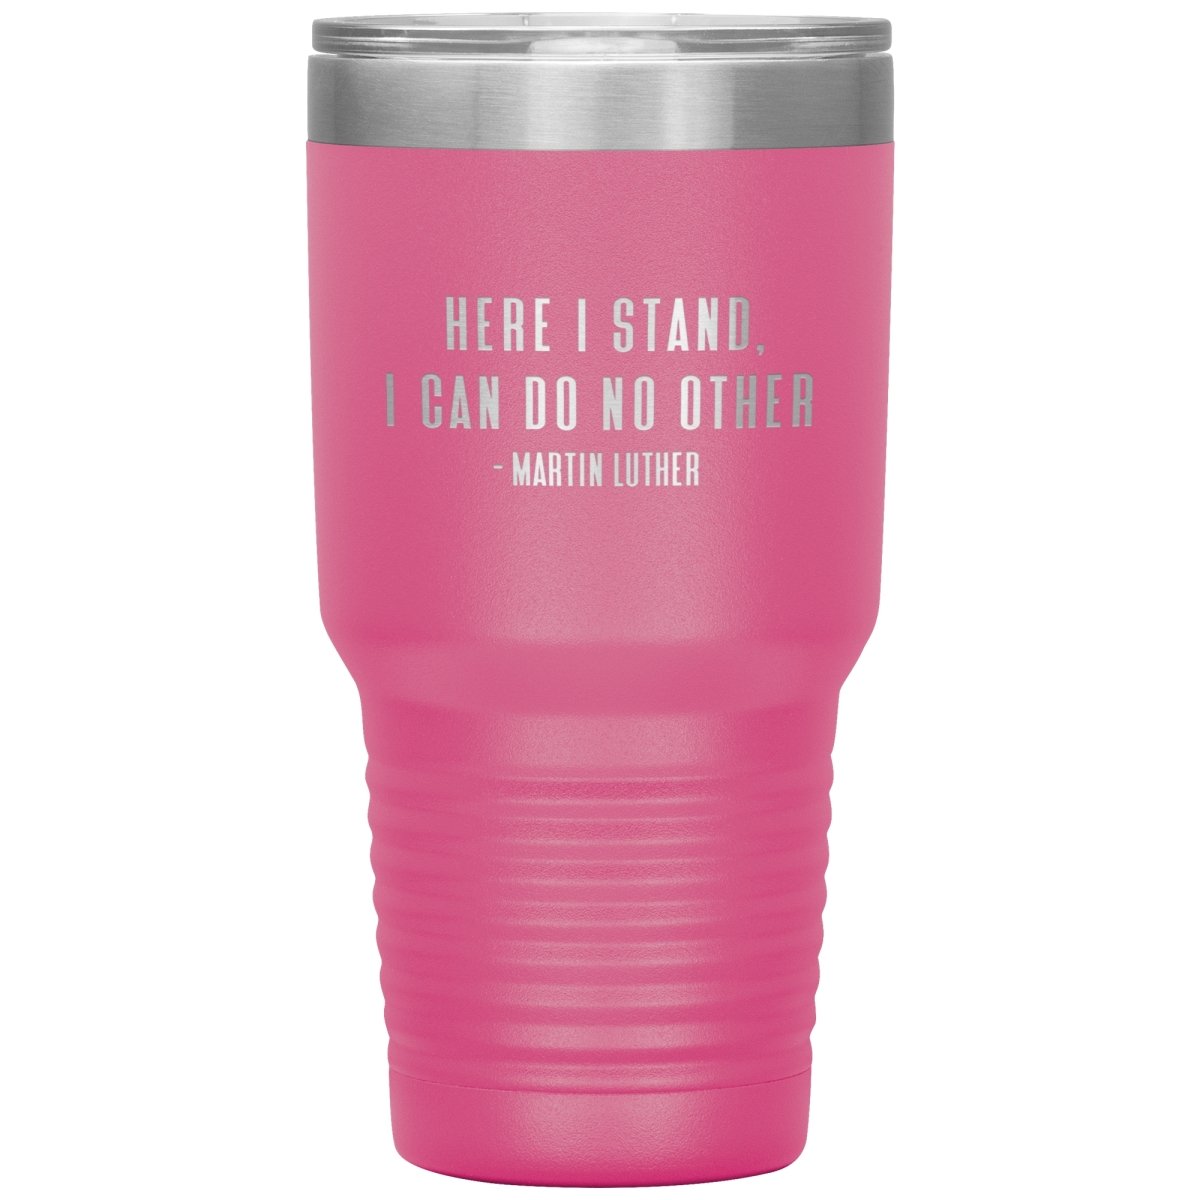 Here I Stand (30oz Stainless Steel Tumbler) - SDG Clothing